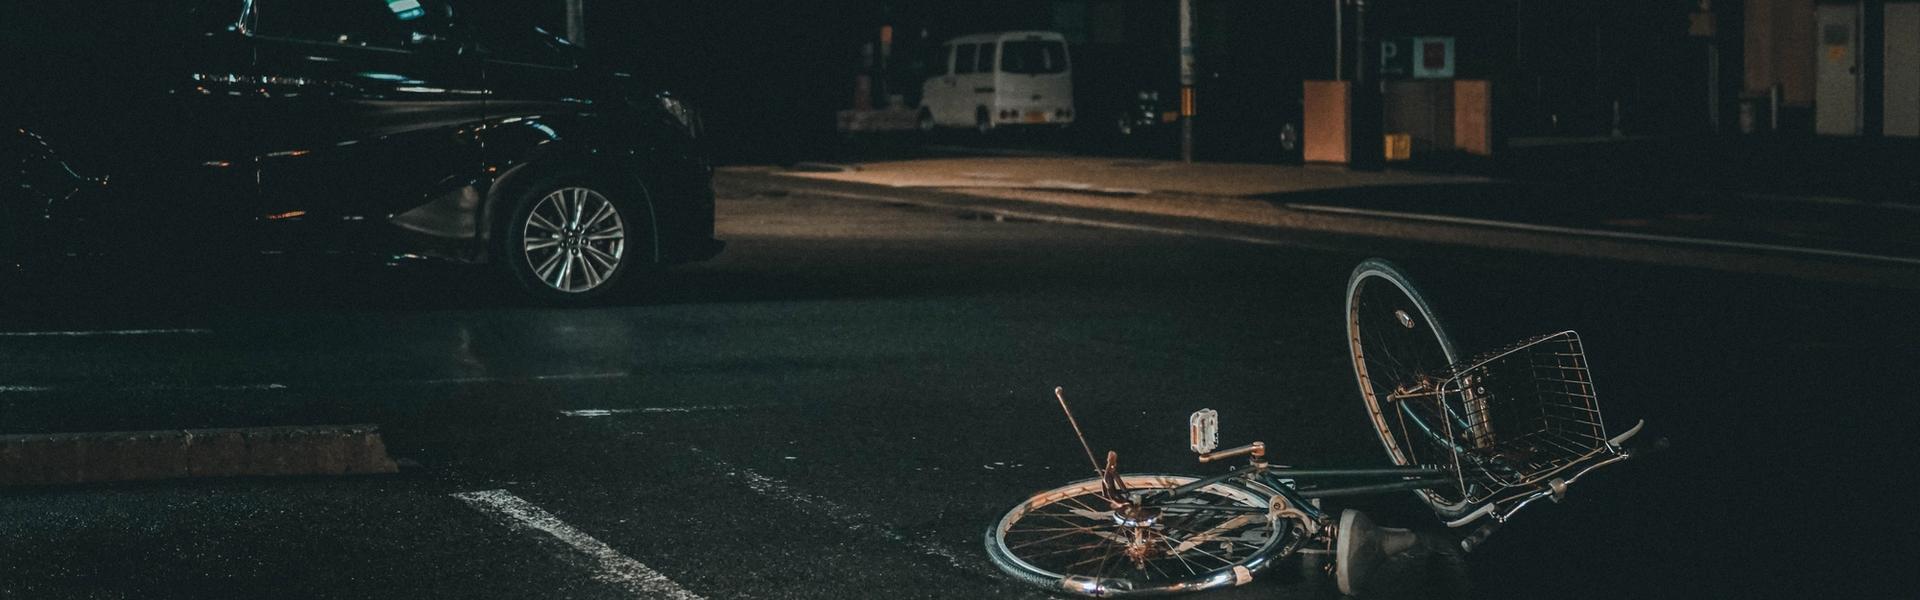 9 Things You Should Do If You Are In a Bicycle Accident